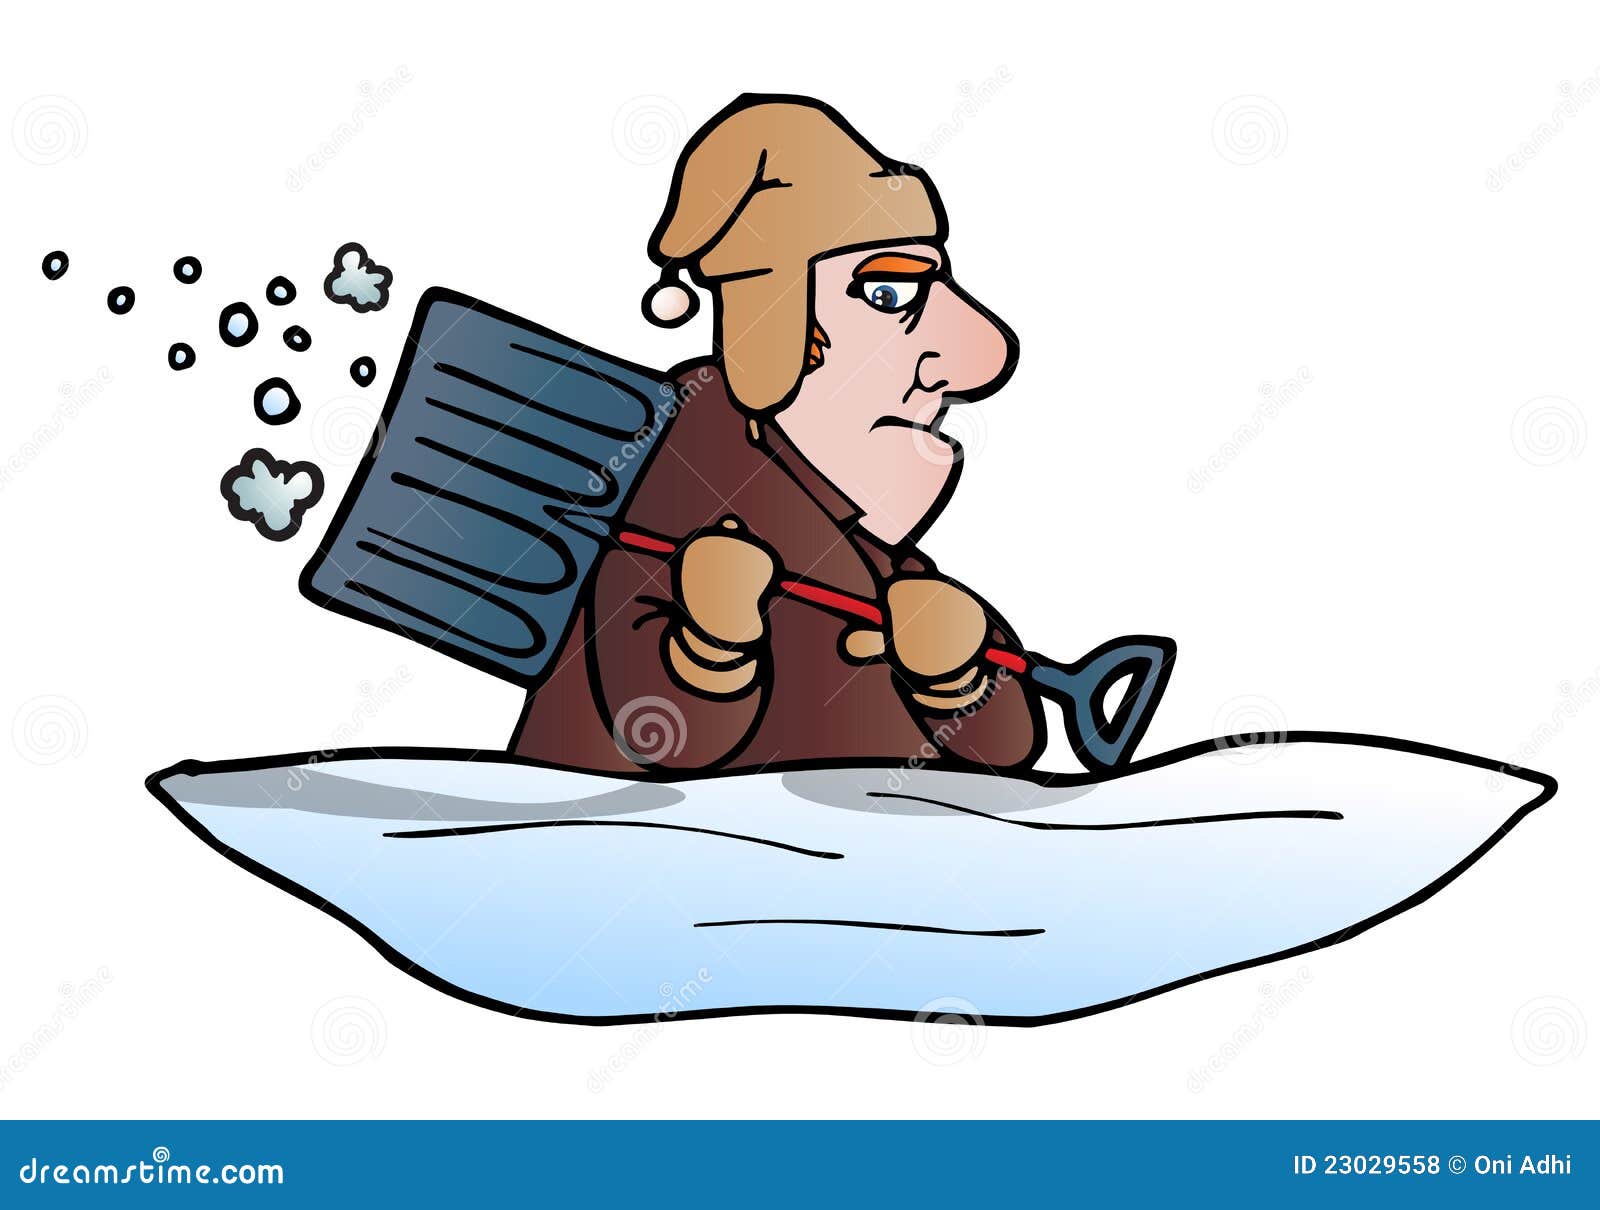 snow removal clipart free - photo #39